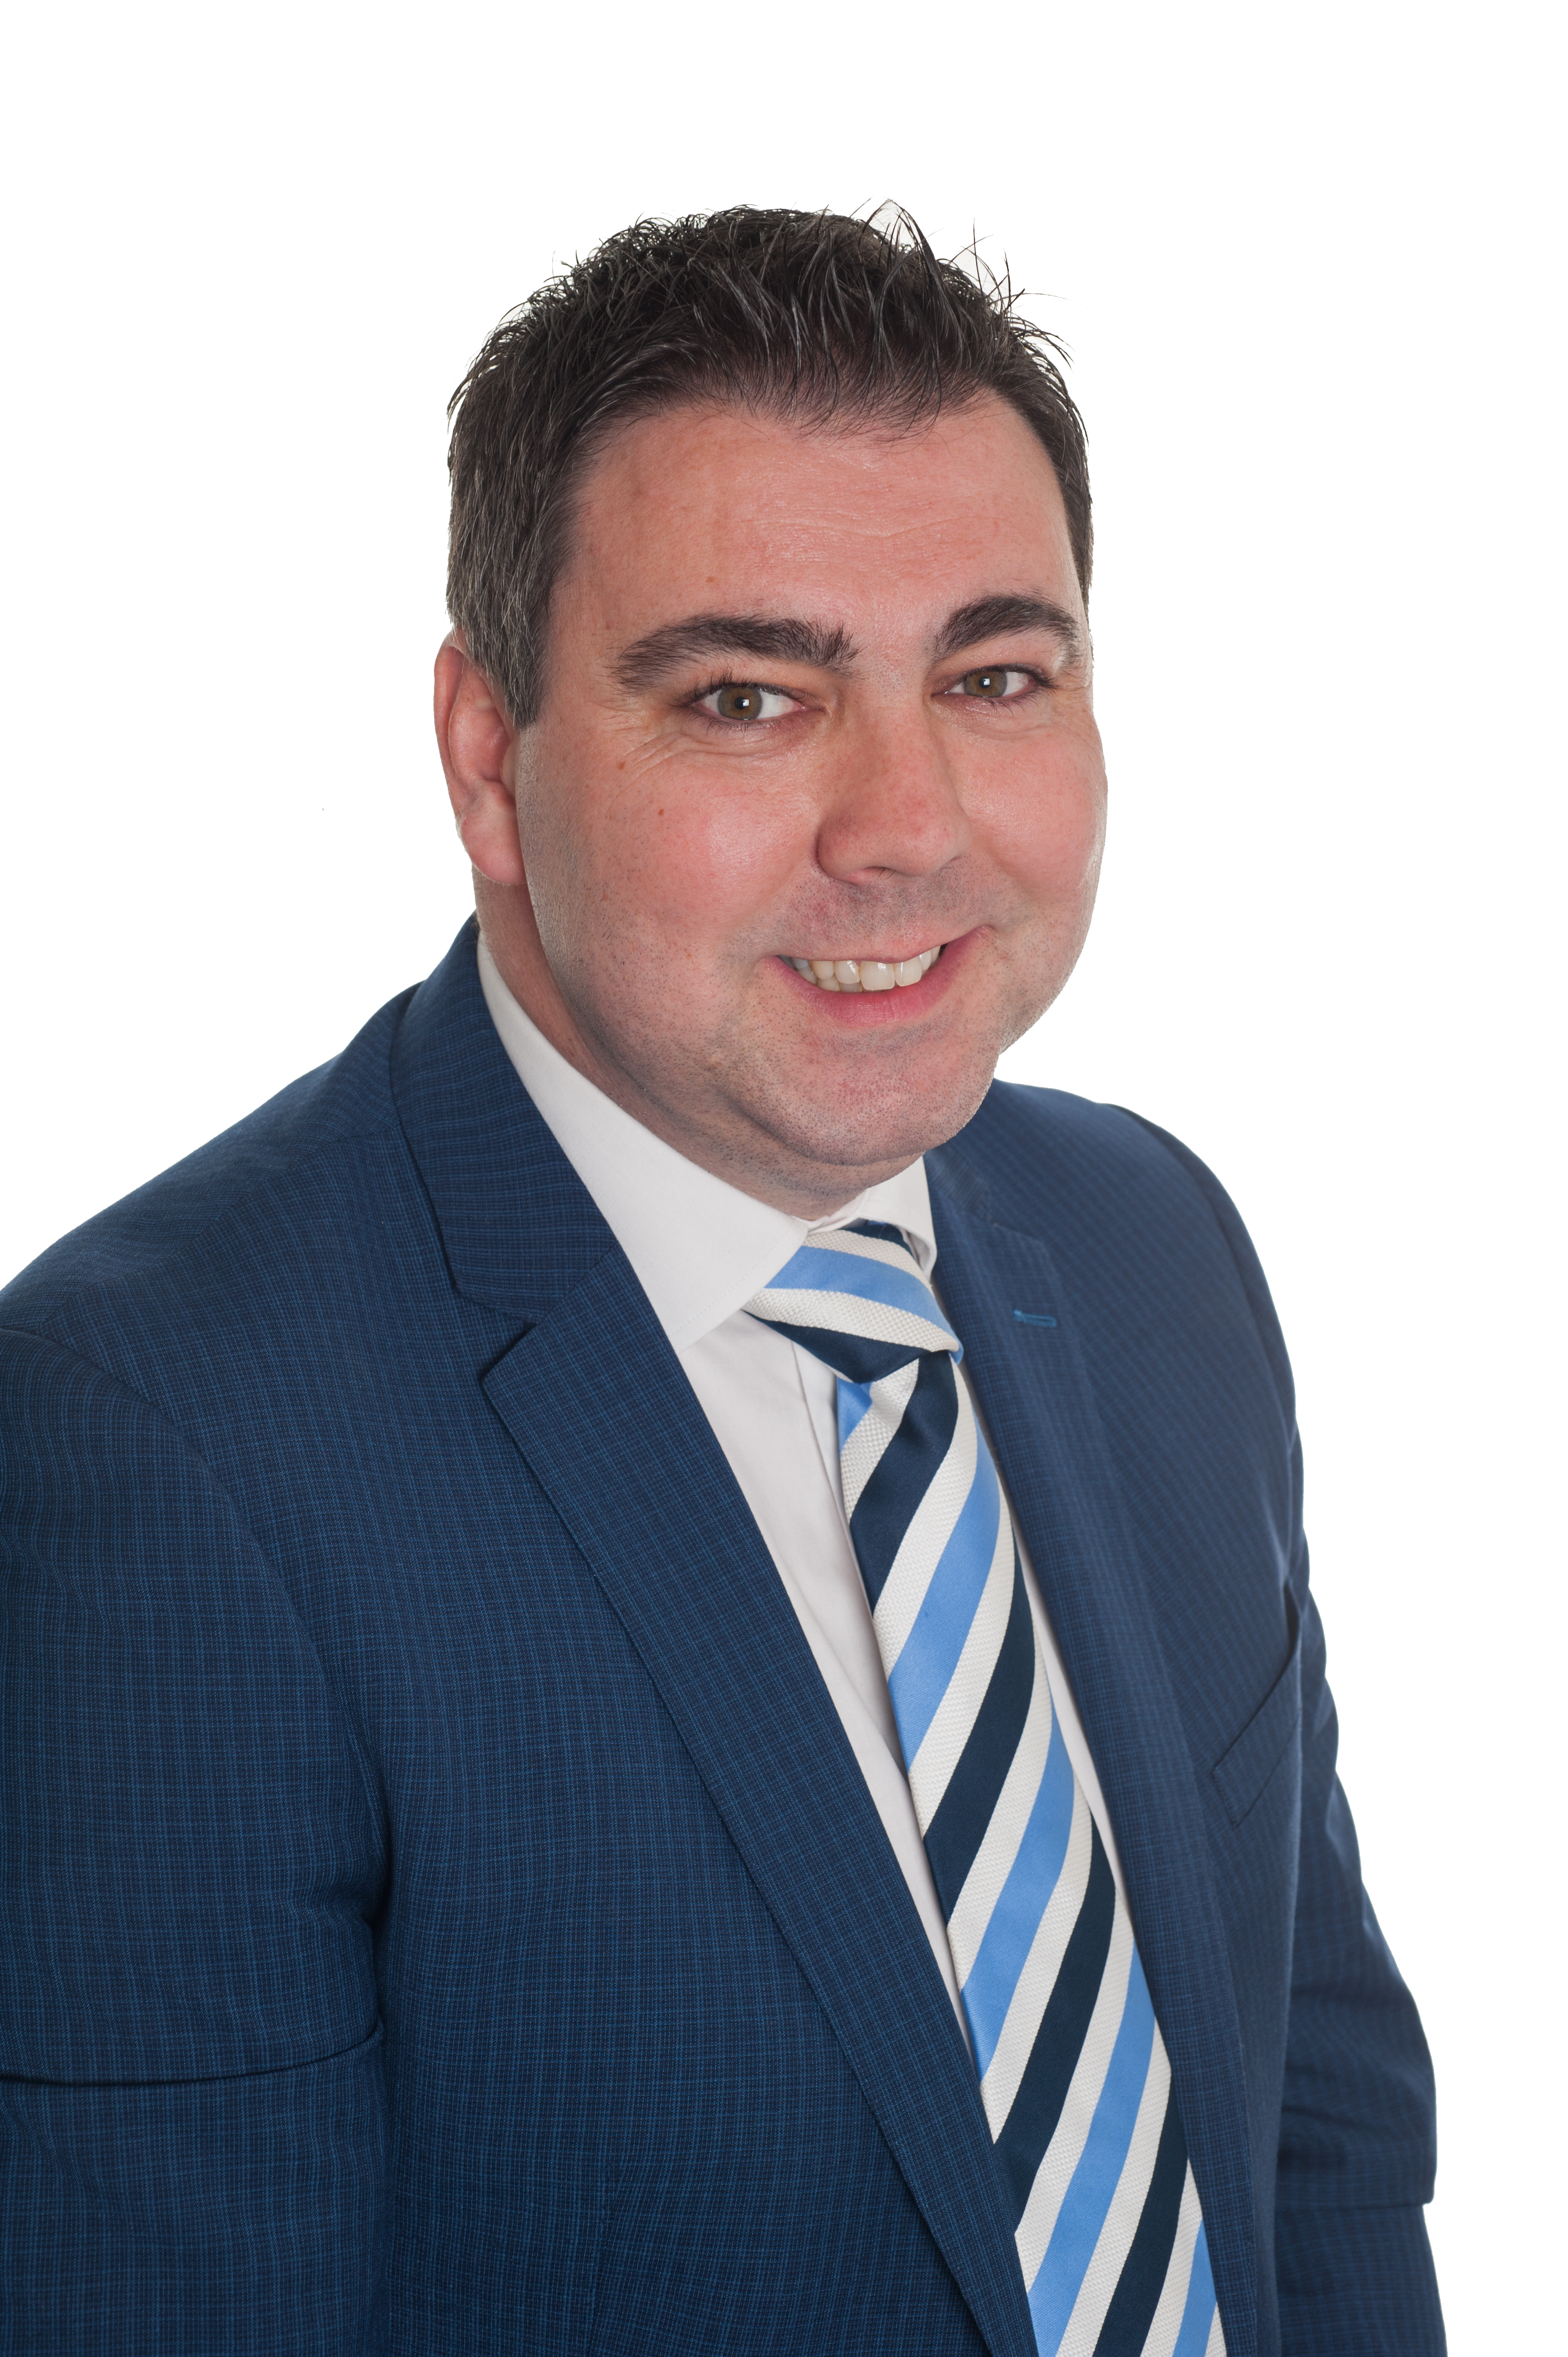 A responsible and affordable Budget to benefit Cork – Cllr. John Paul O’ Shea